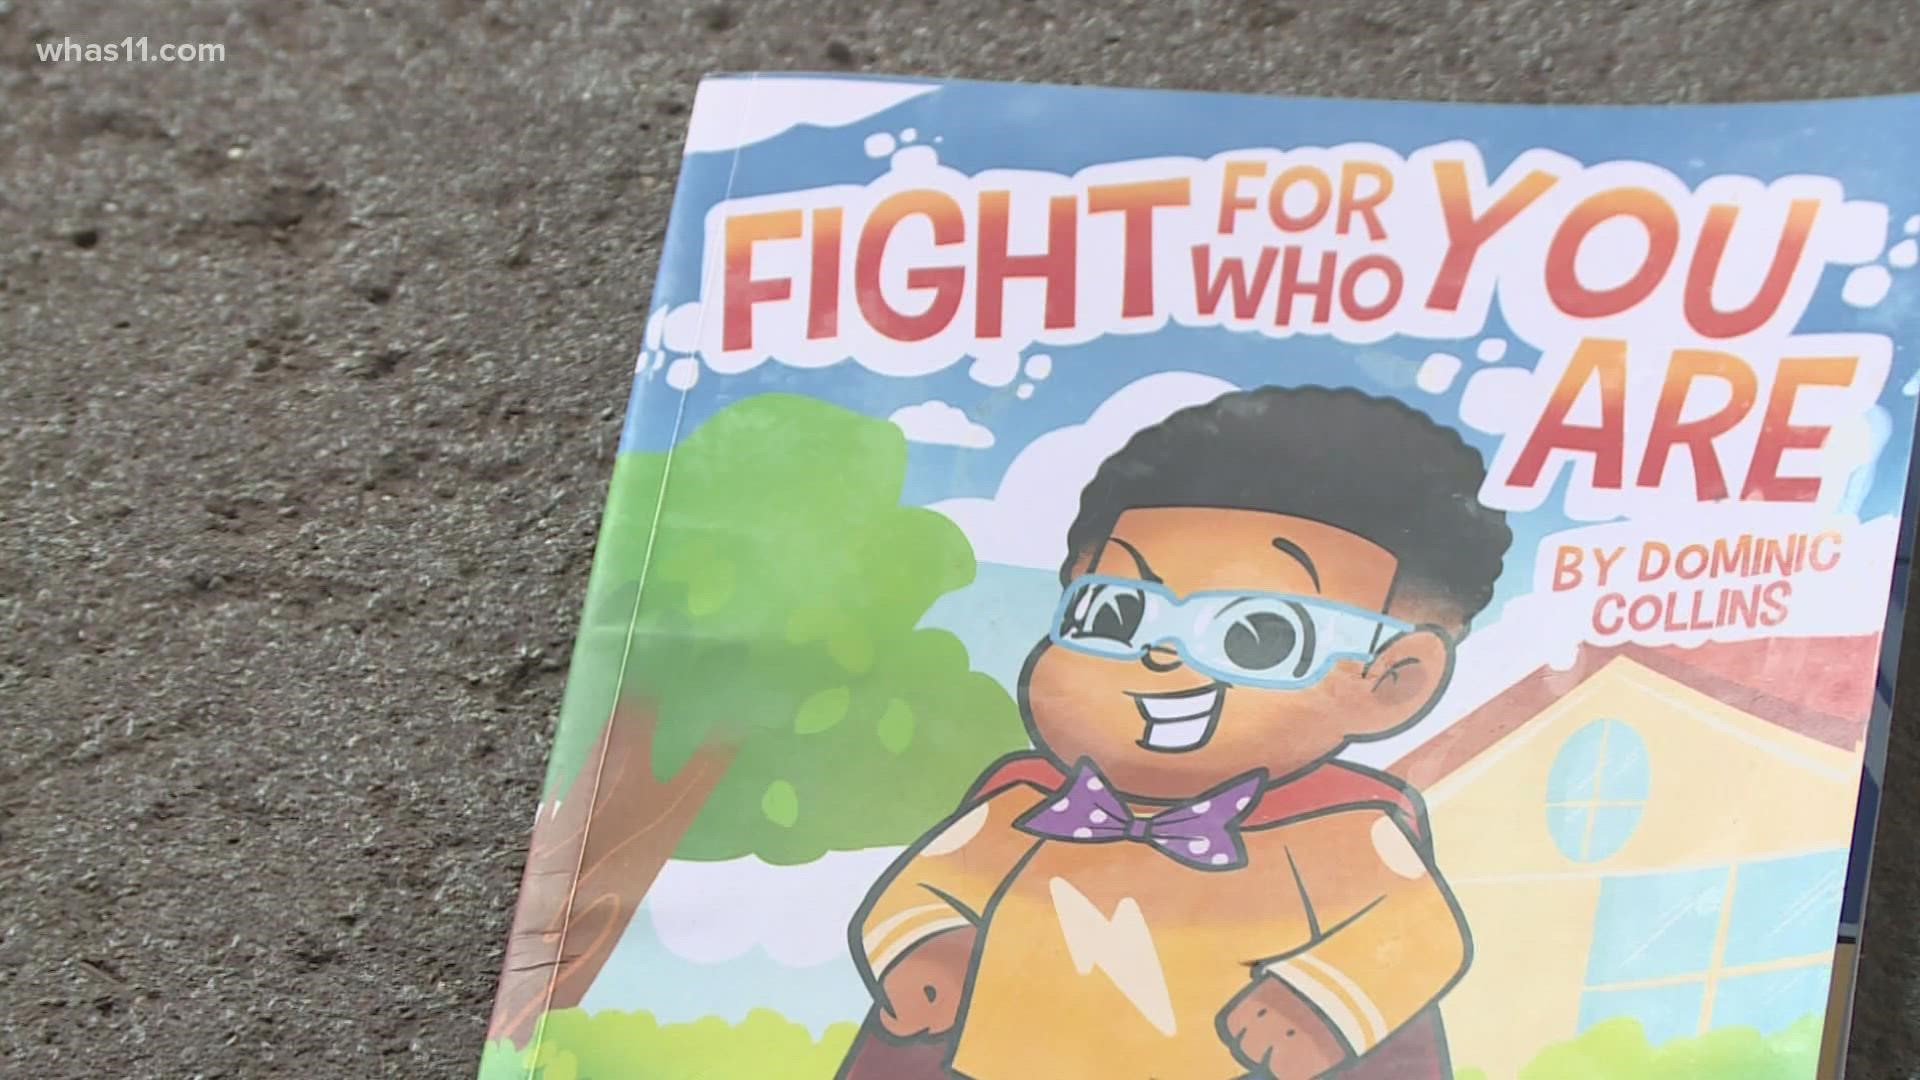 Dominic Collins wrote 'Fight For Who You Are' in 2021. He hopes that the message will resonate with kids who may be struggling with being themselves.